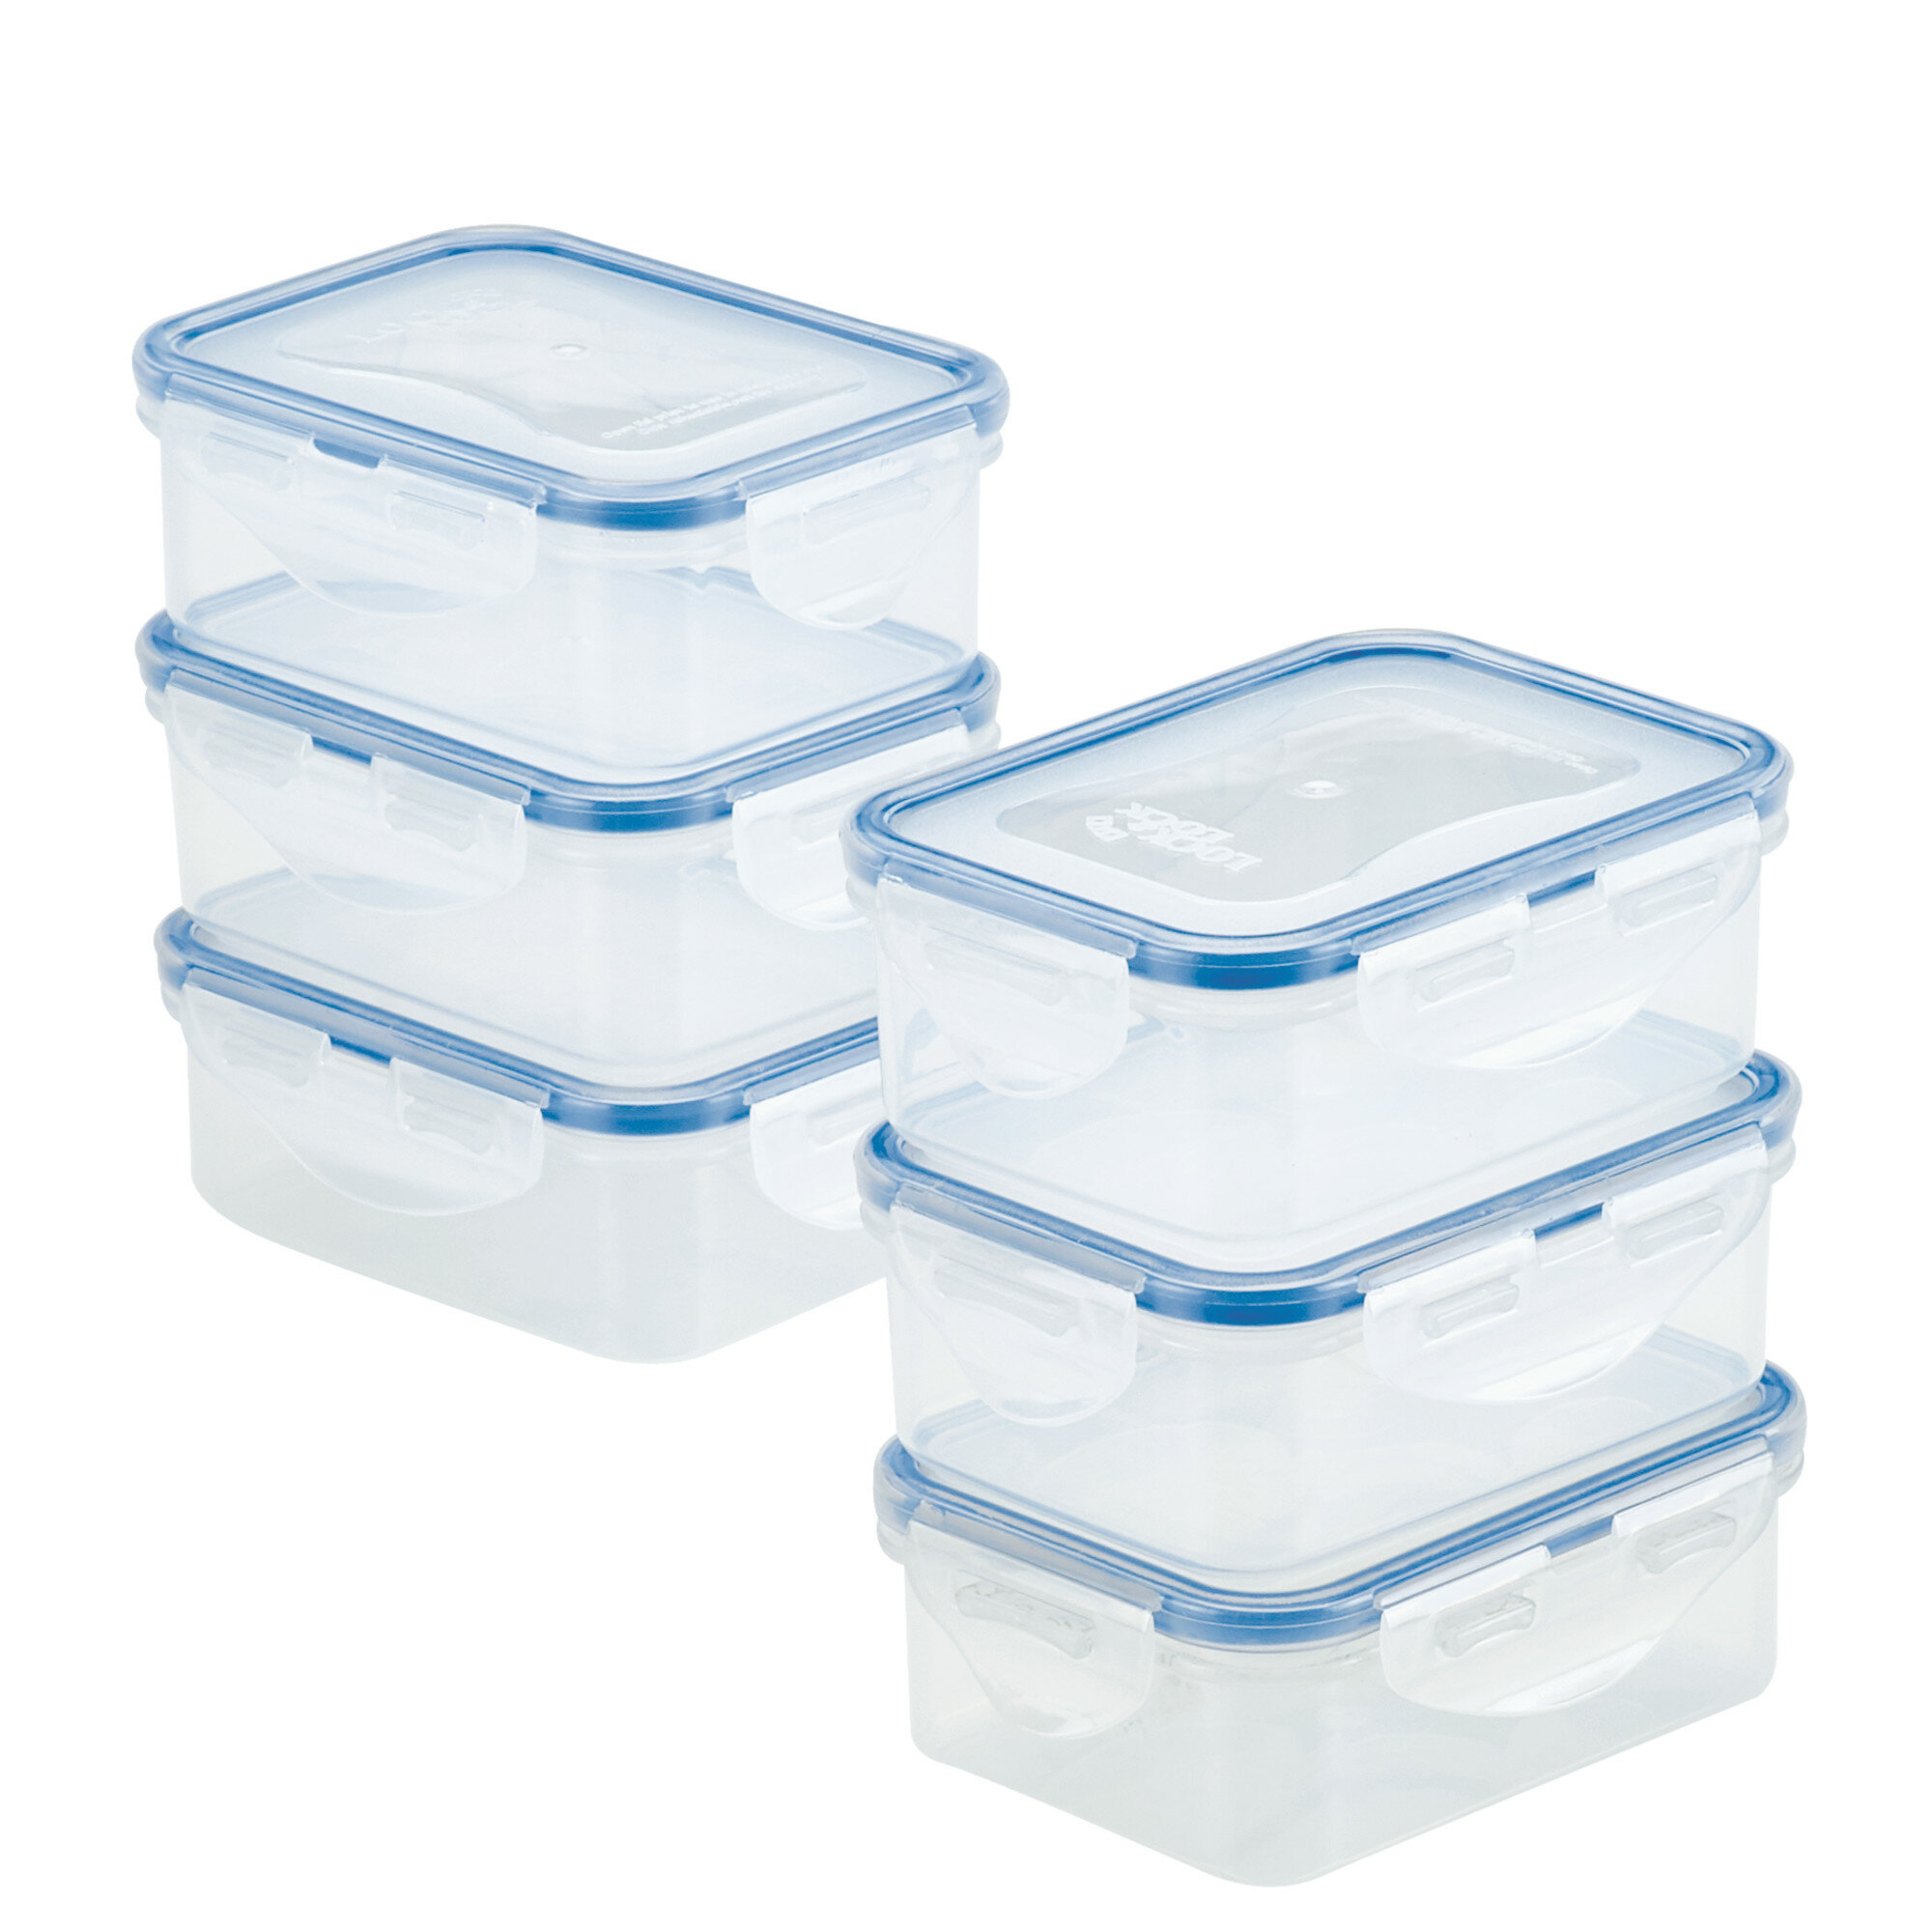 Snapware Meal Prep 12-pc Plastic Food Storage Container with Lids, Size: 16-oz, 8-oz, 4-oz, 2-oz, and 4.6-Cup Divided